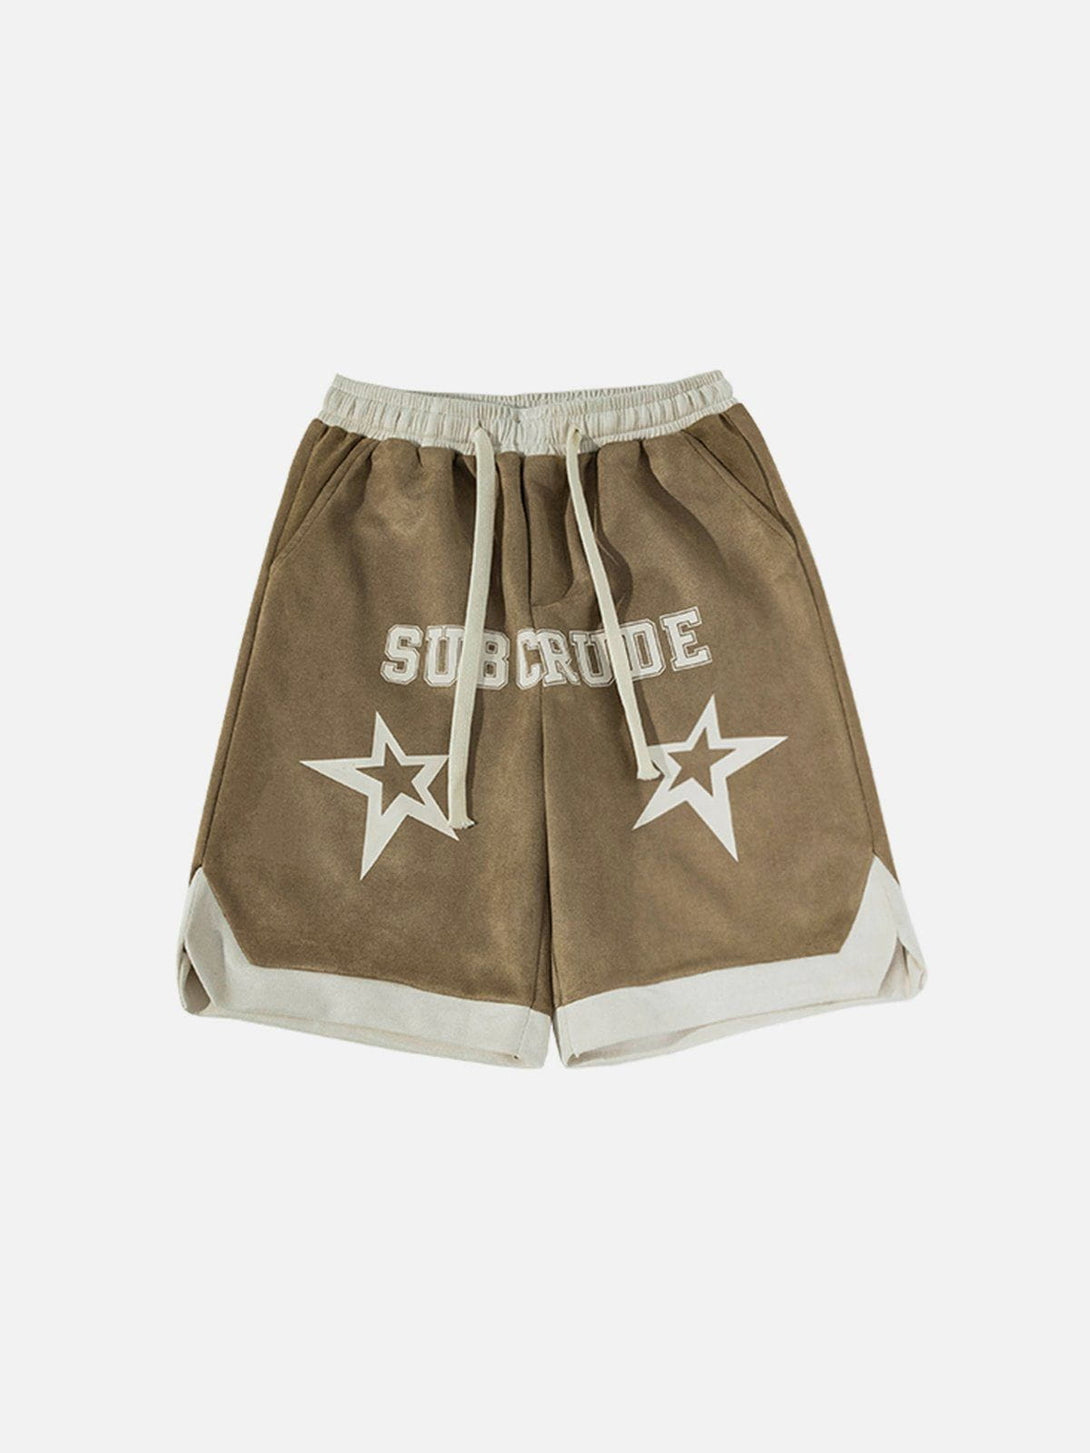 Majesda® - Letters Star Shorts outfit ideas streetwear fashion